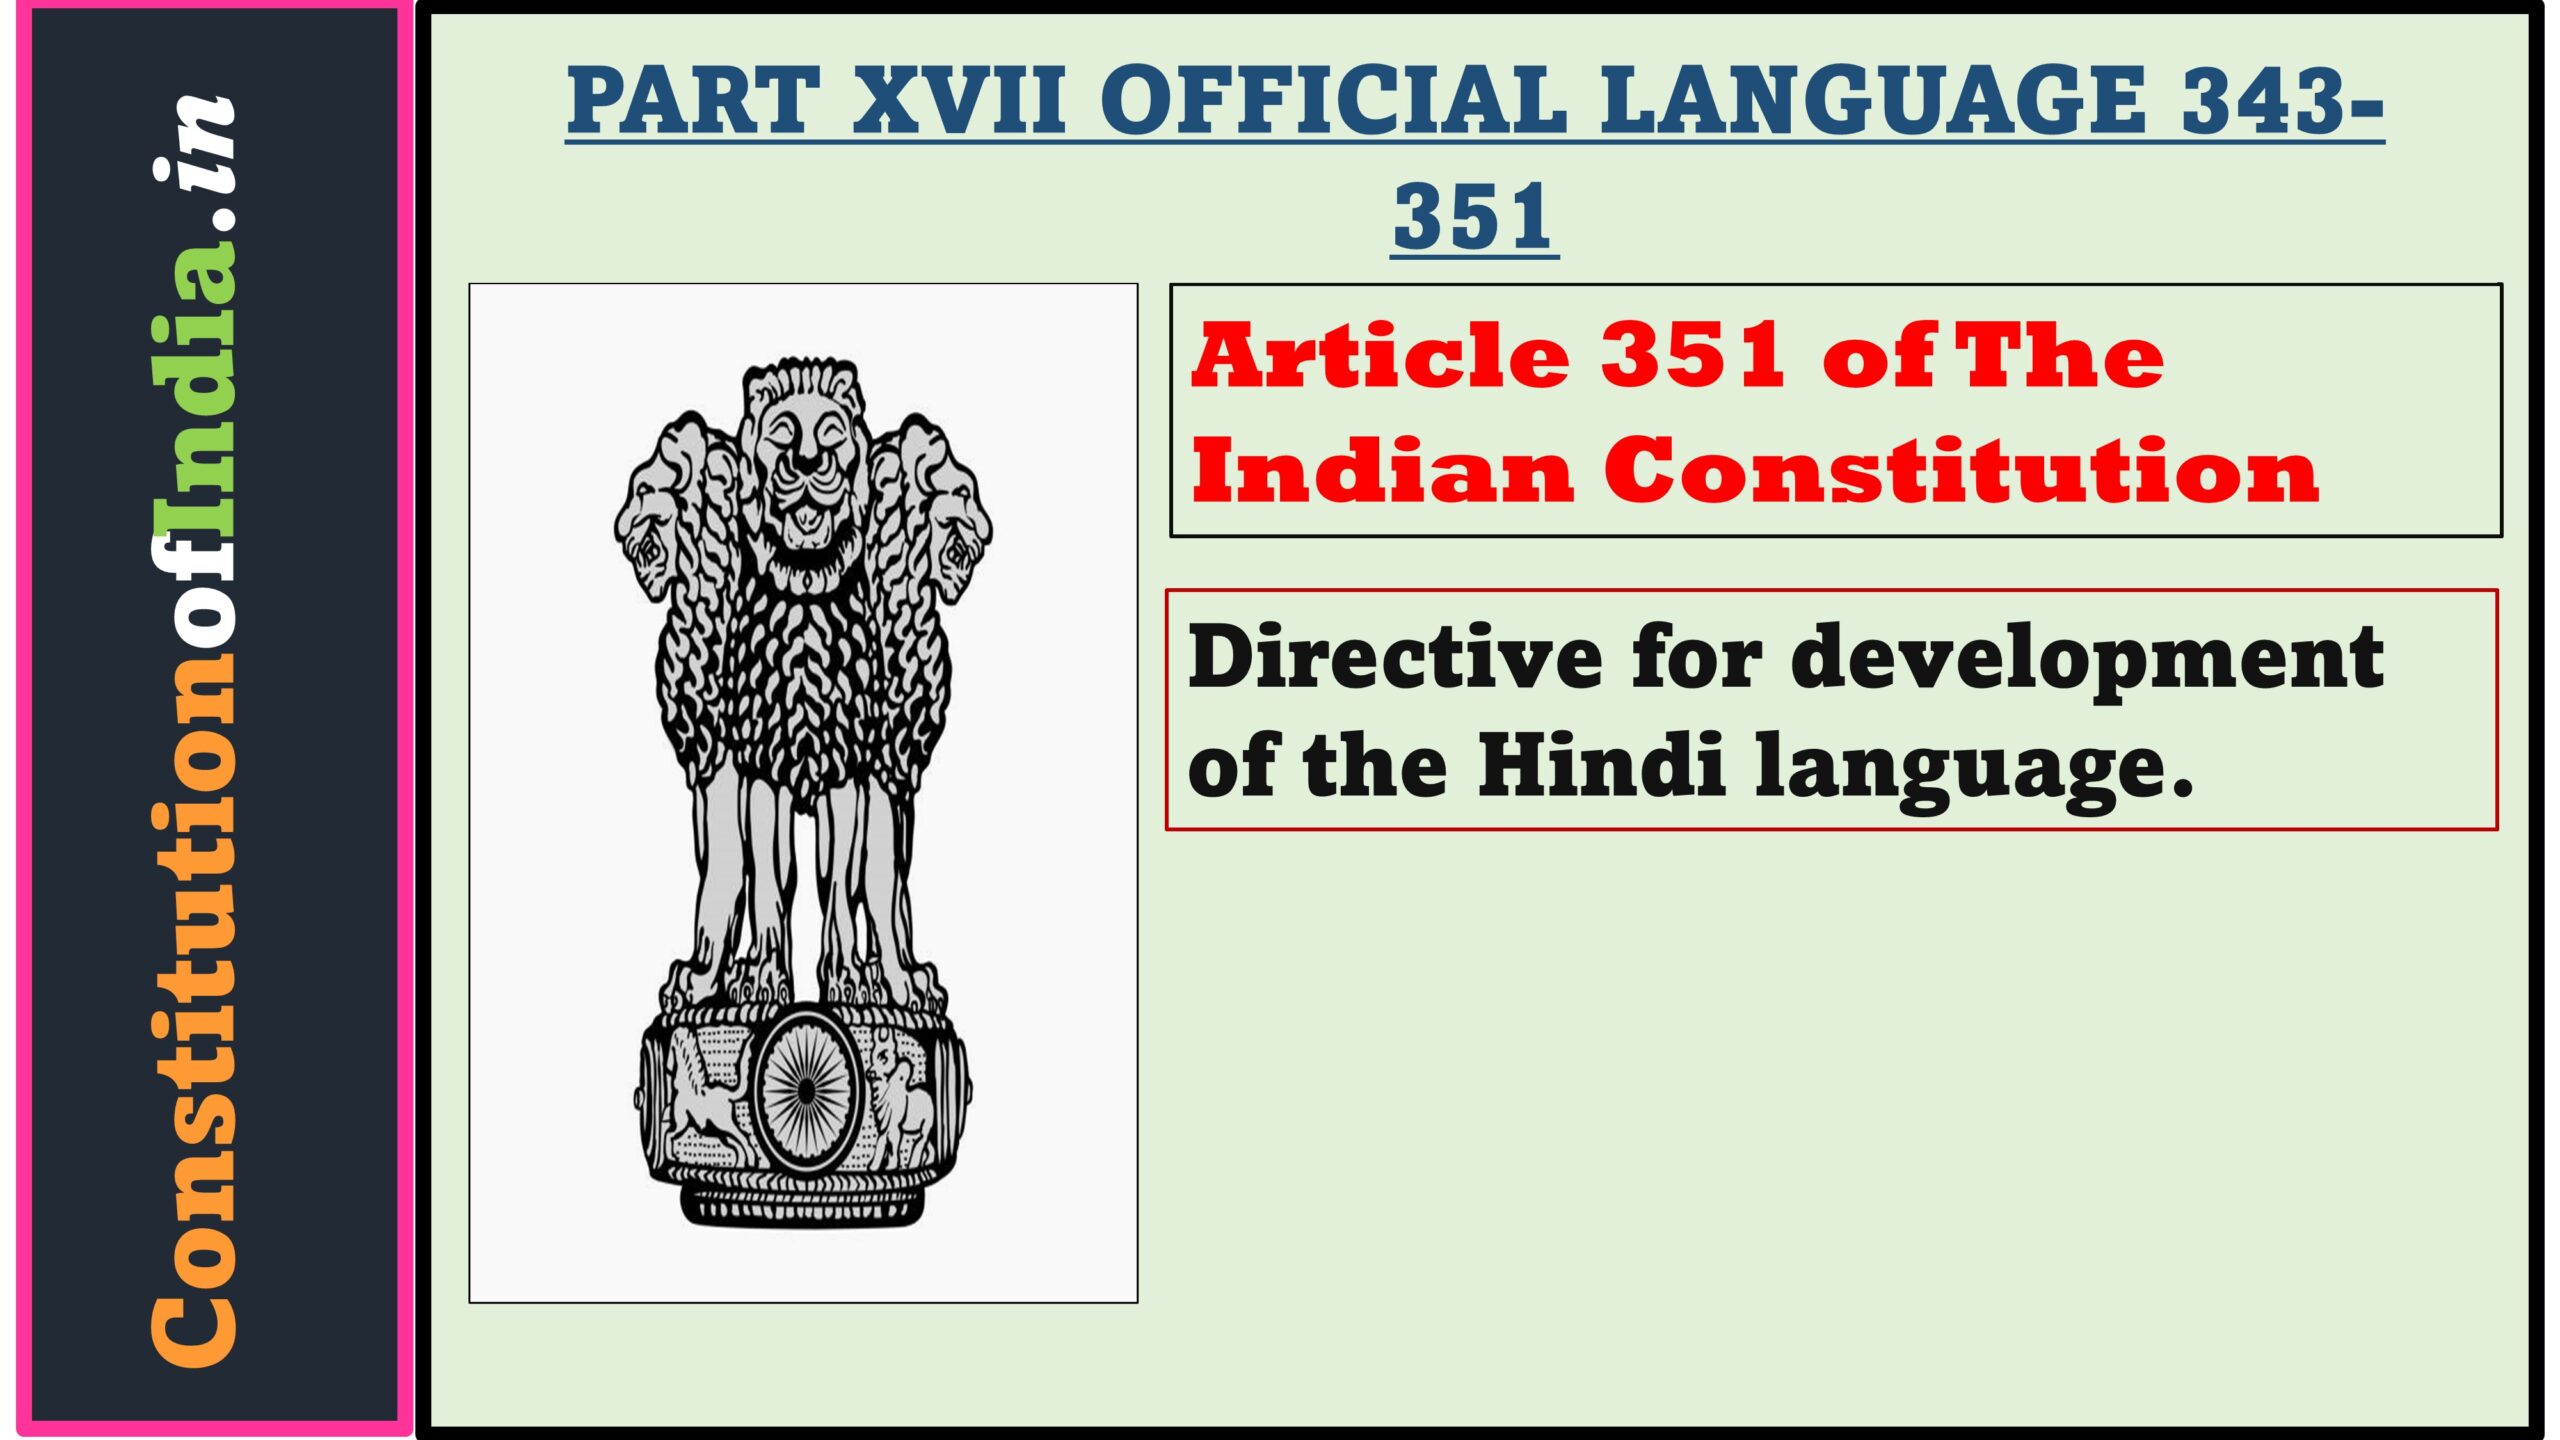 Article 351 of The Indian Constitution